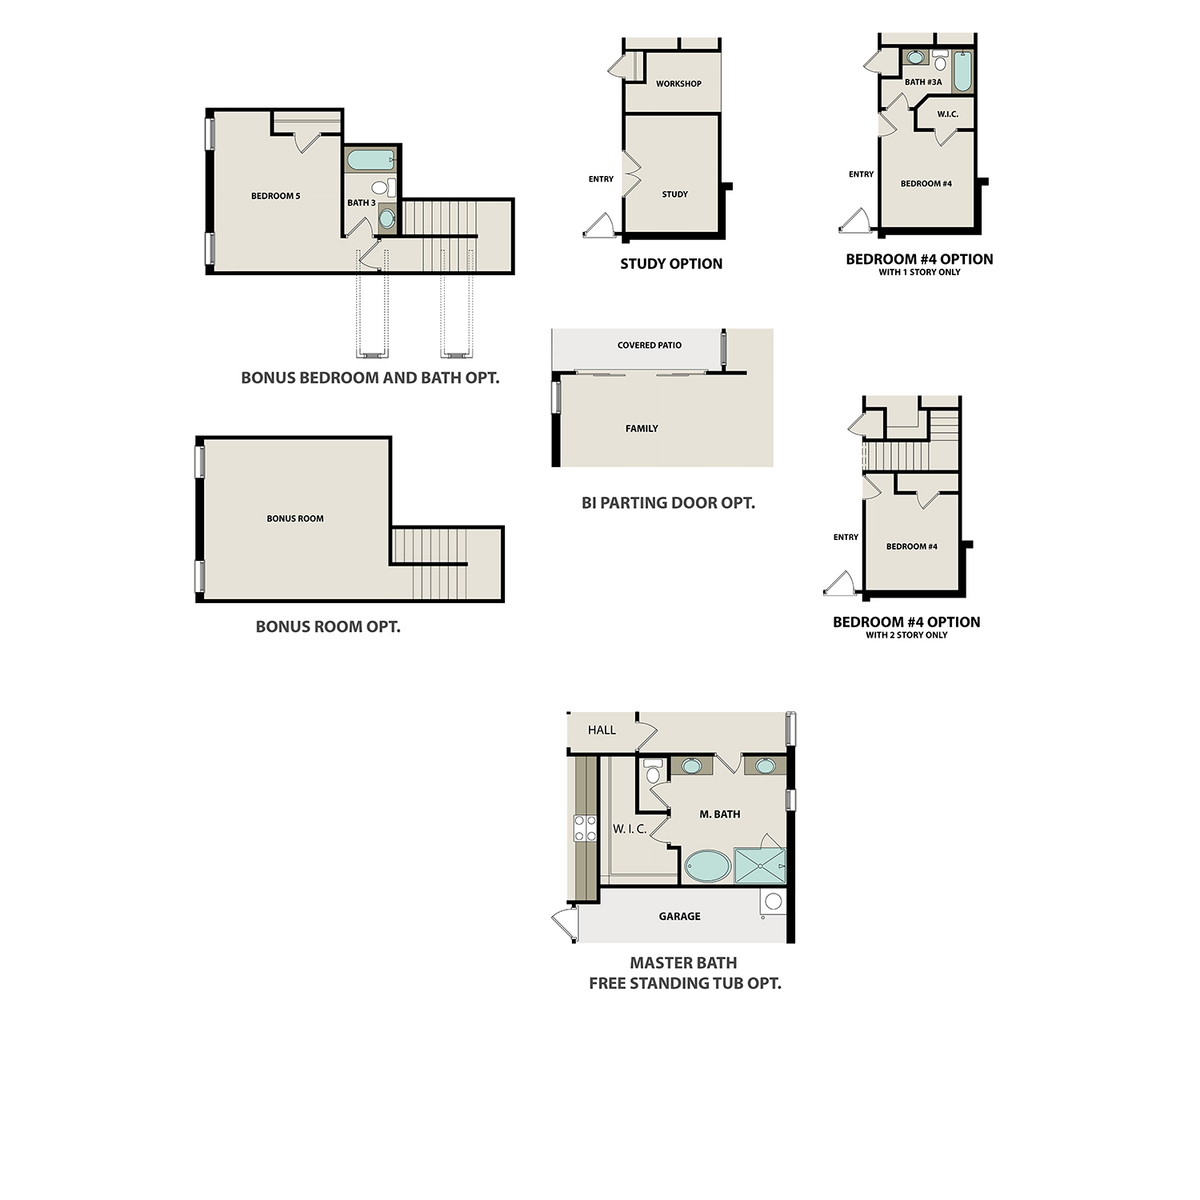 4 - The Ansley with Bonus buildable floor plan layout in Davidson Homes' Carellton community.